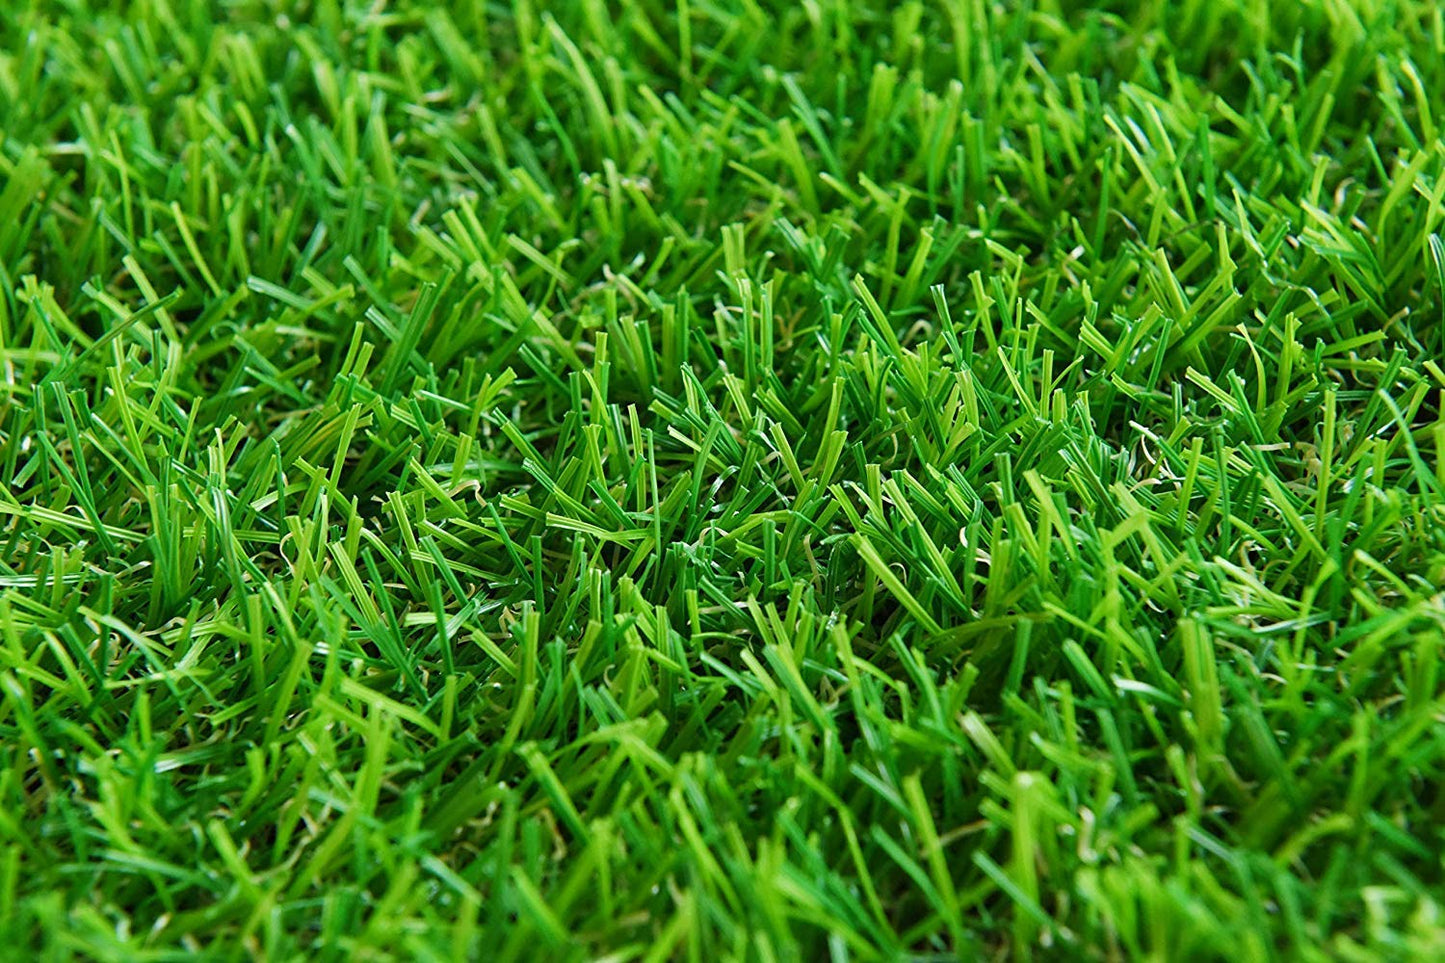 Carpets: Waterproof Artificial Grass Carpet For Home and Office